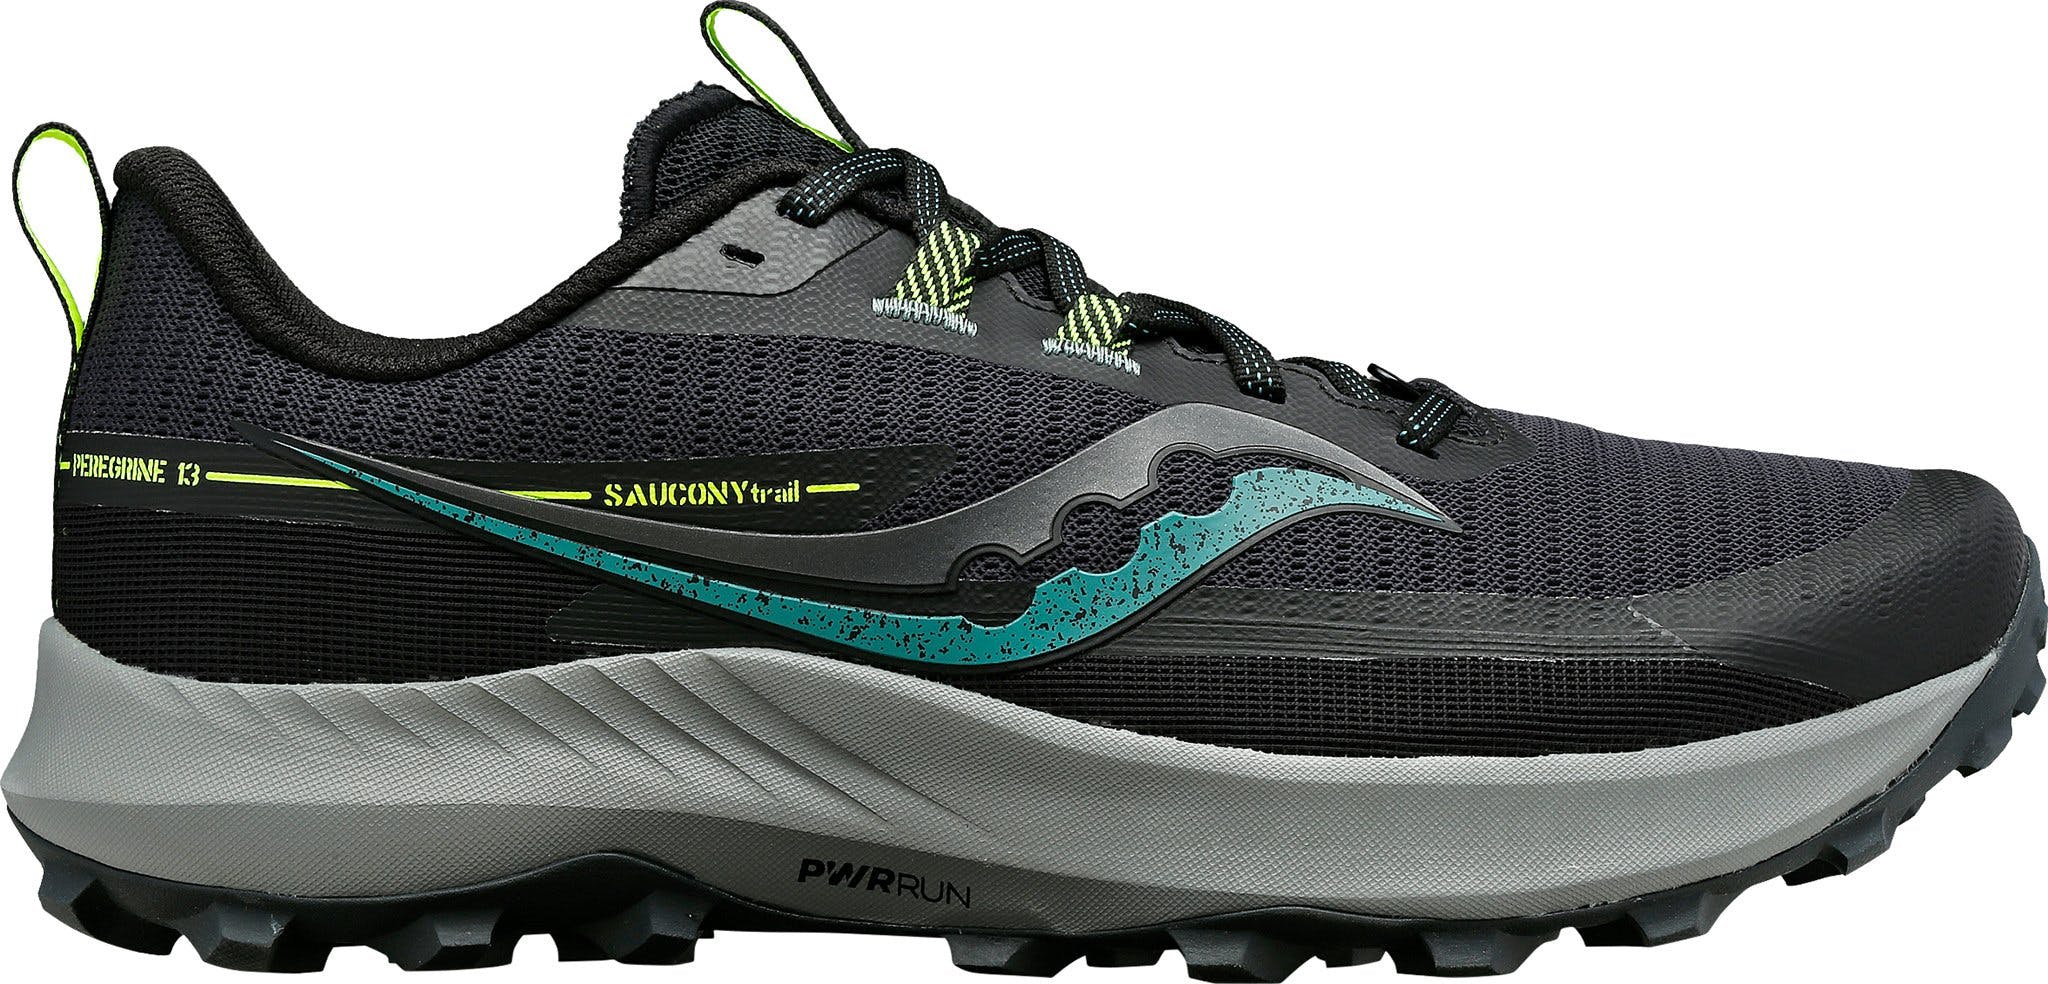 Product image for Peregrine 13 Trail Running Shoes - Men's